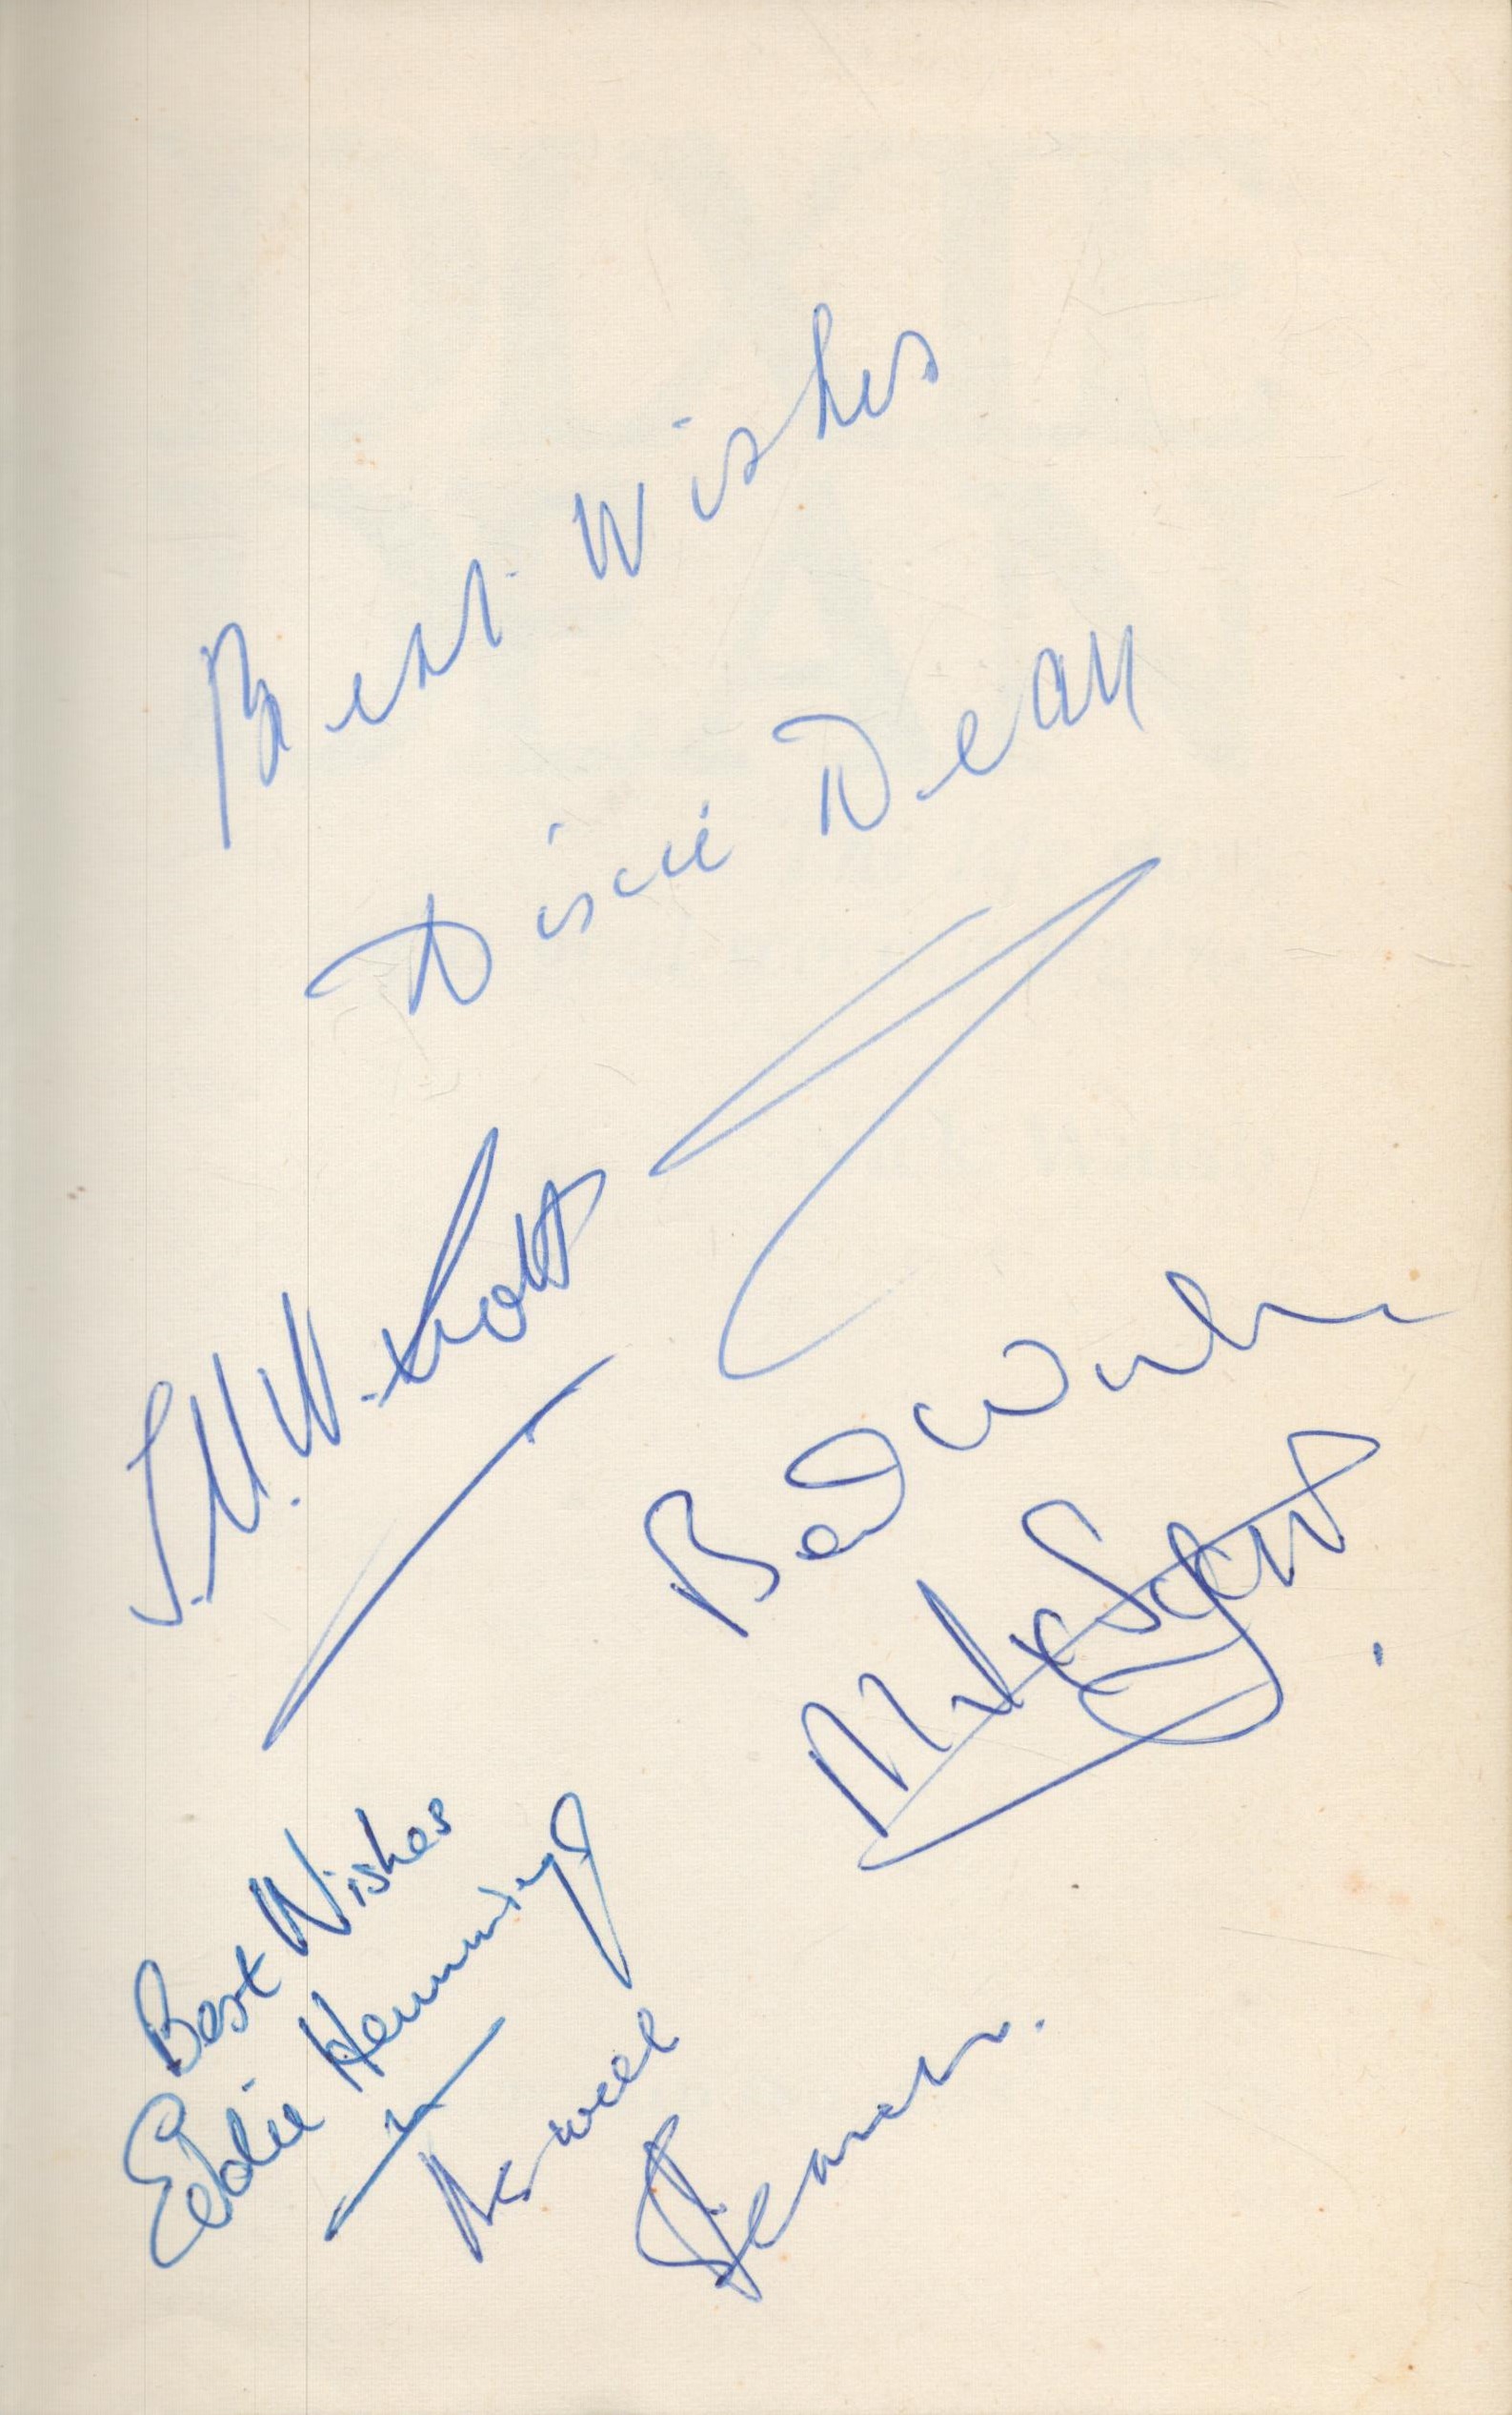 Dixie Dean signed Dixie Dean The Life Story Of A Goal Scoring Legend and 3 other signatures hardback - Image 2 of 4